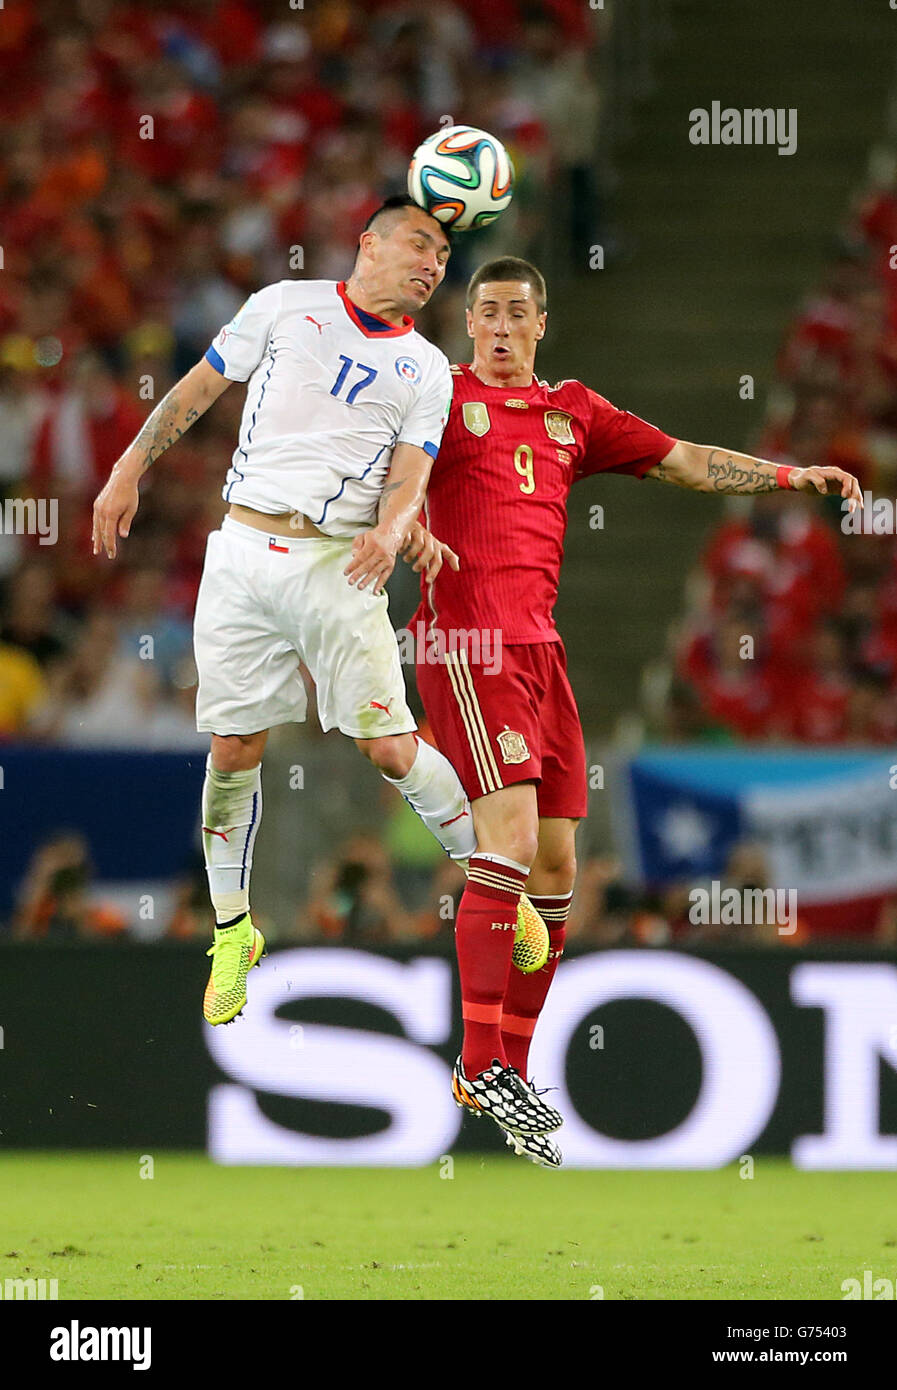 Soccer - FIFA World Cup 2014 - Group B - Spain v Chile - Maracana. Chile's Gary Medel and Spain's Fernando Torres (right) battle for the ball in the air Stock Photo